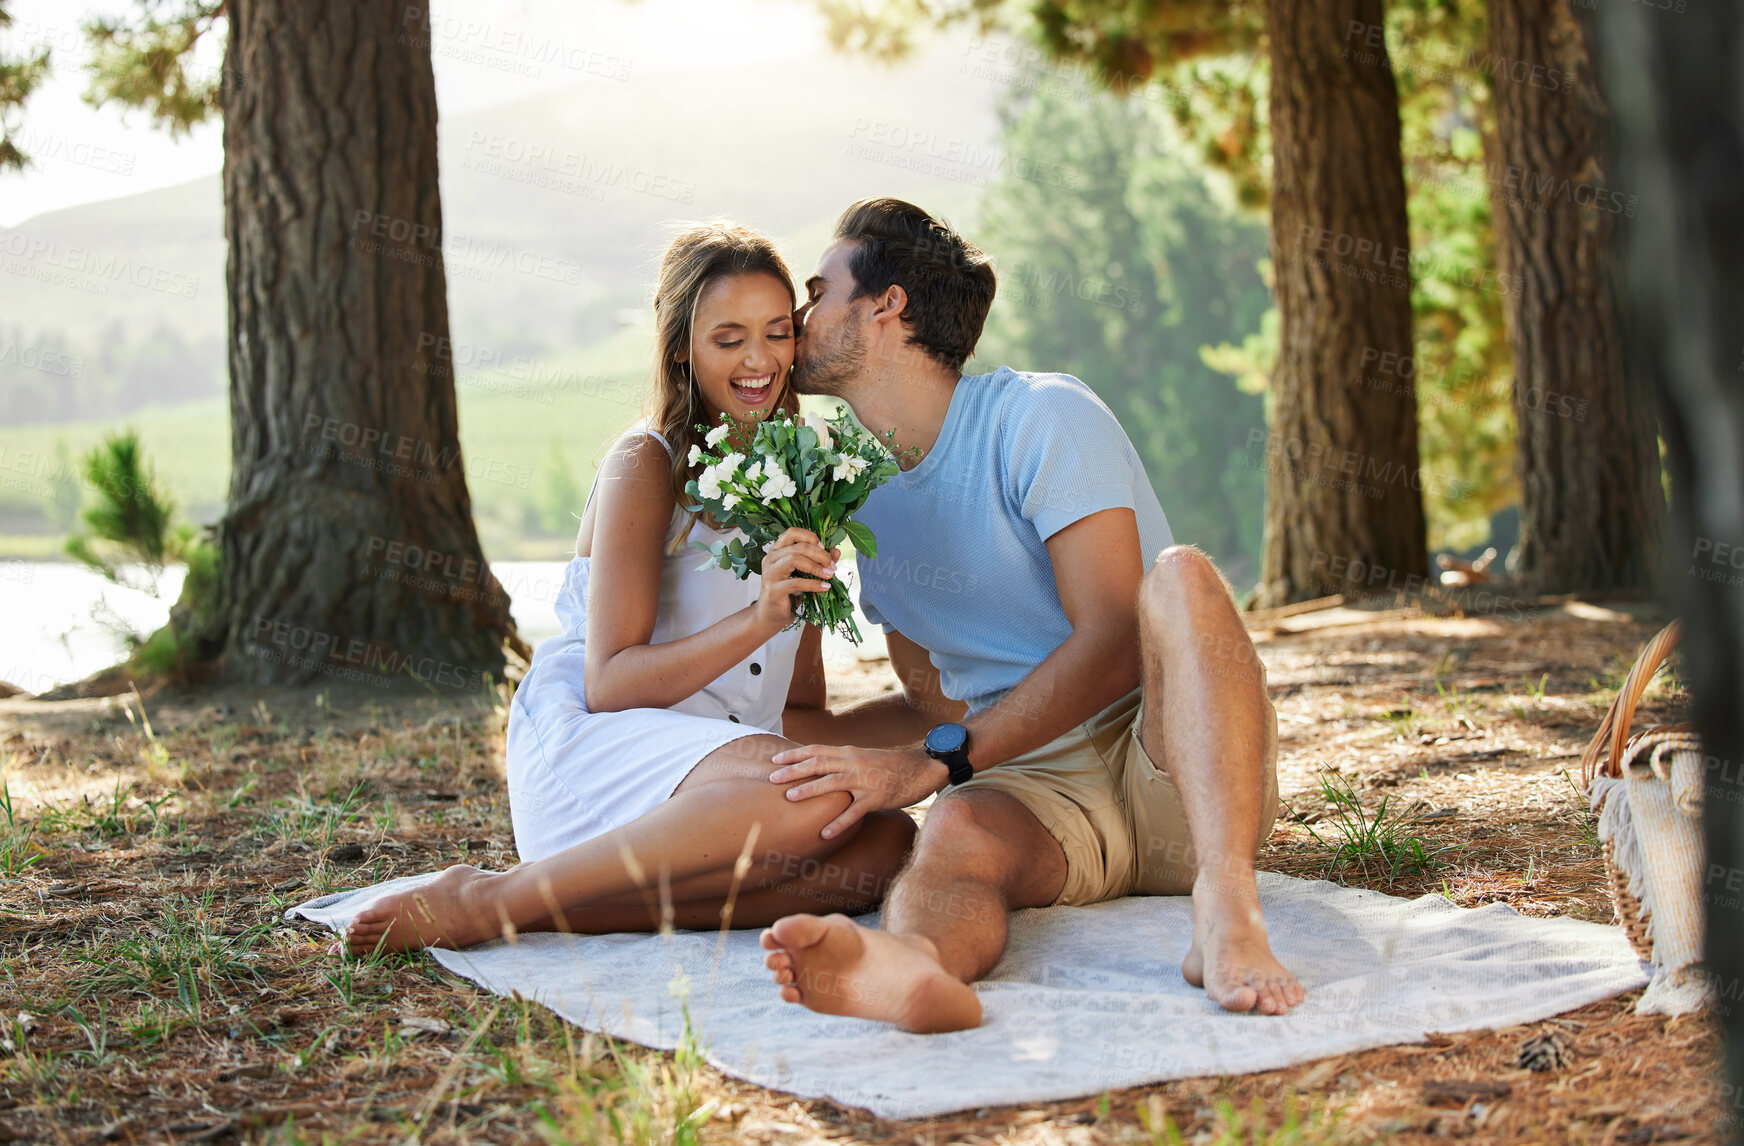 Buy stock photo Couple kiss, love and flowers on picnic, summer with freedom and adventure, affection in relationship and care outdoor. Happy people together in nature, commitment and trust with romance in forest